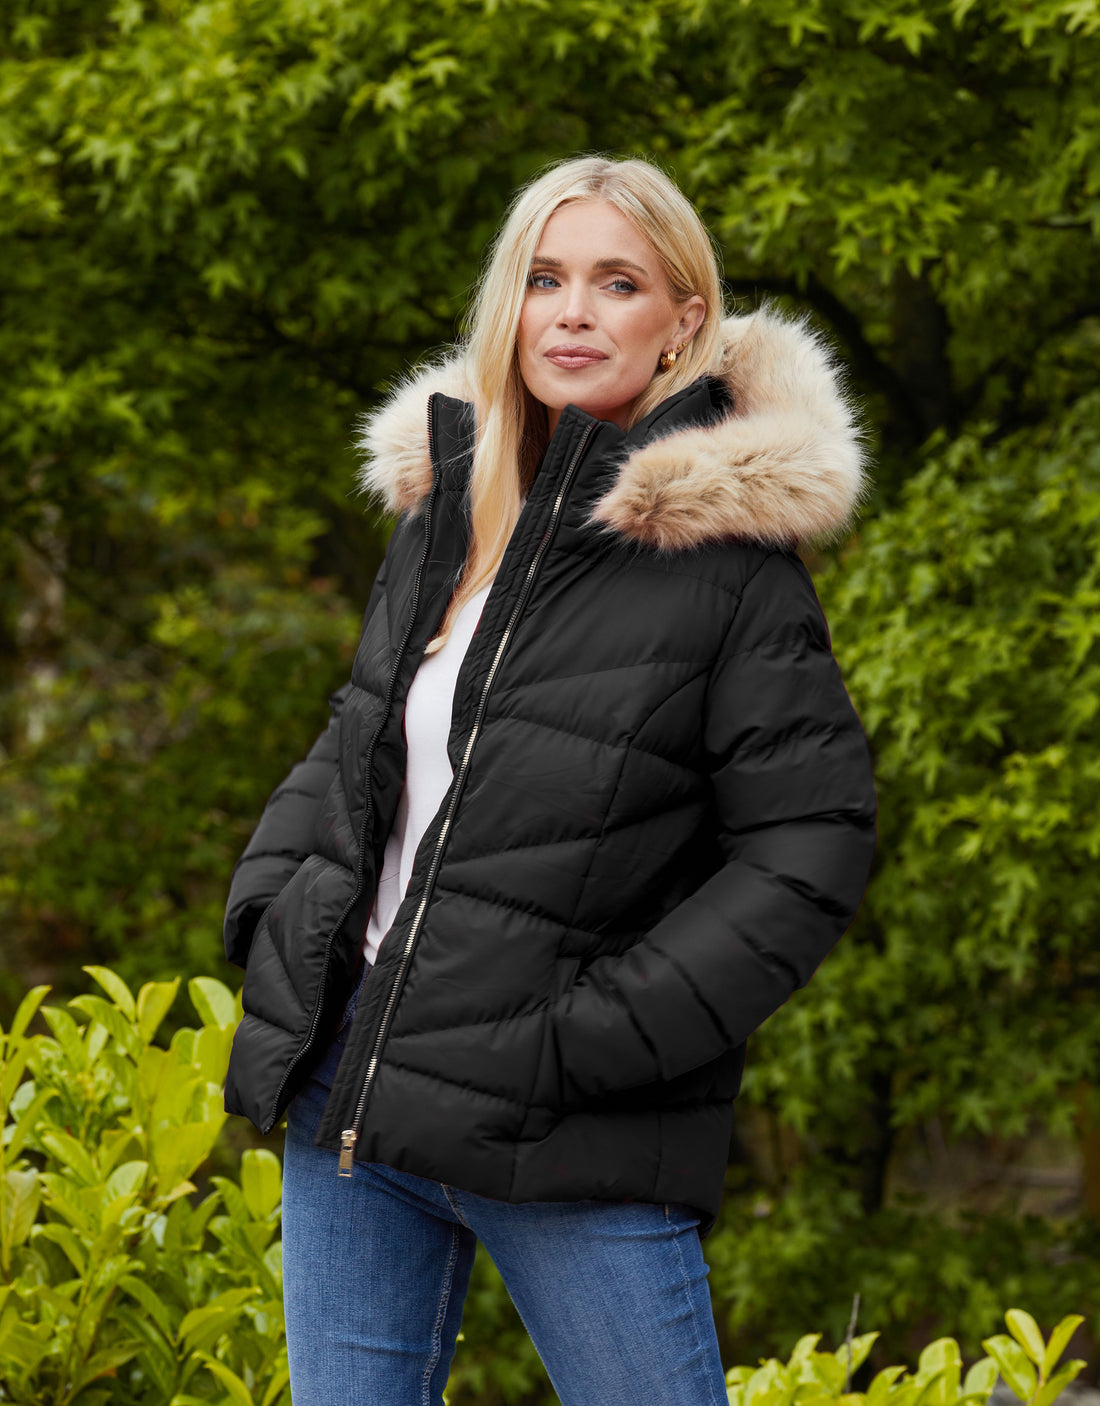 Like Meghan Markle, we just can't give up the parka